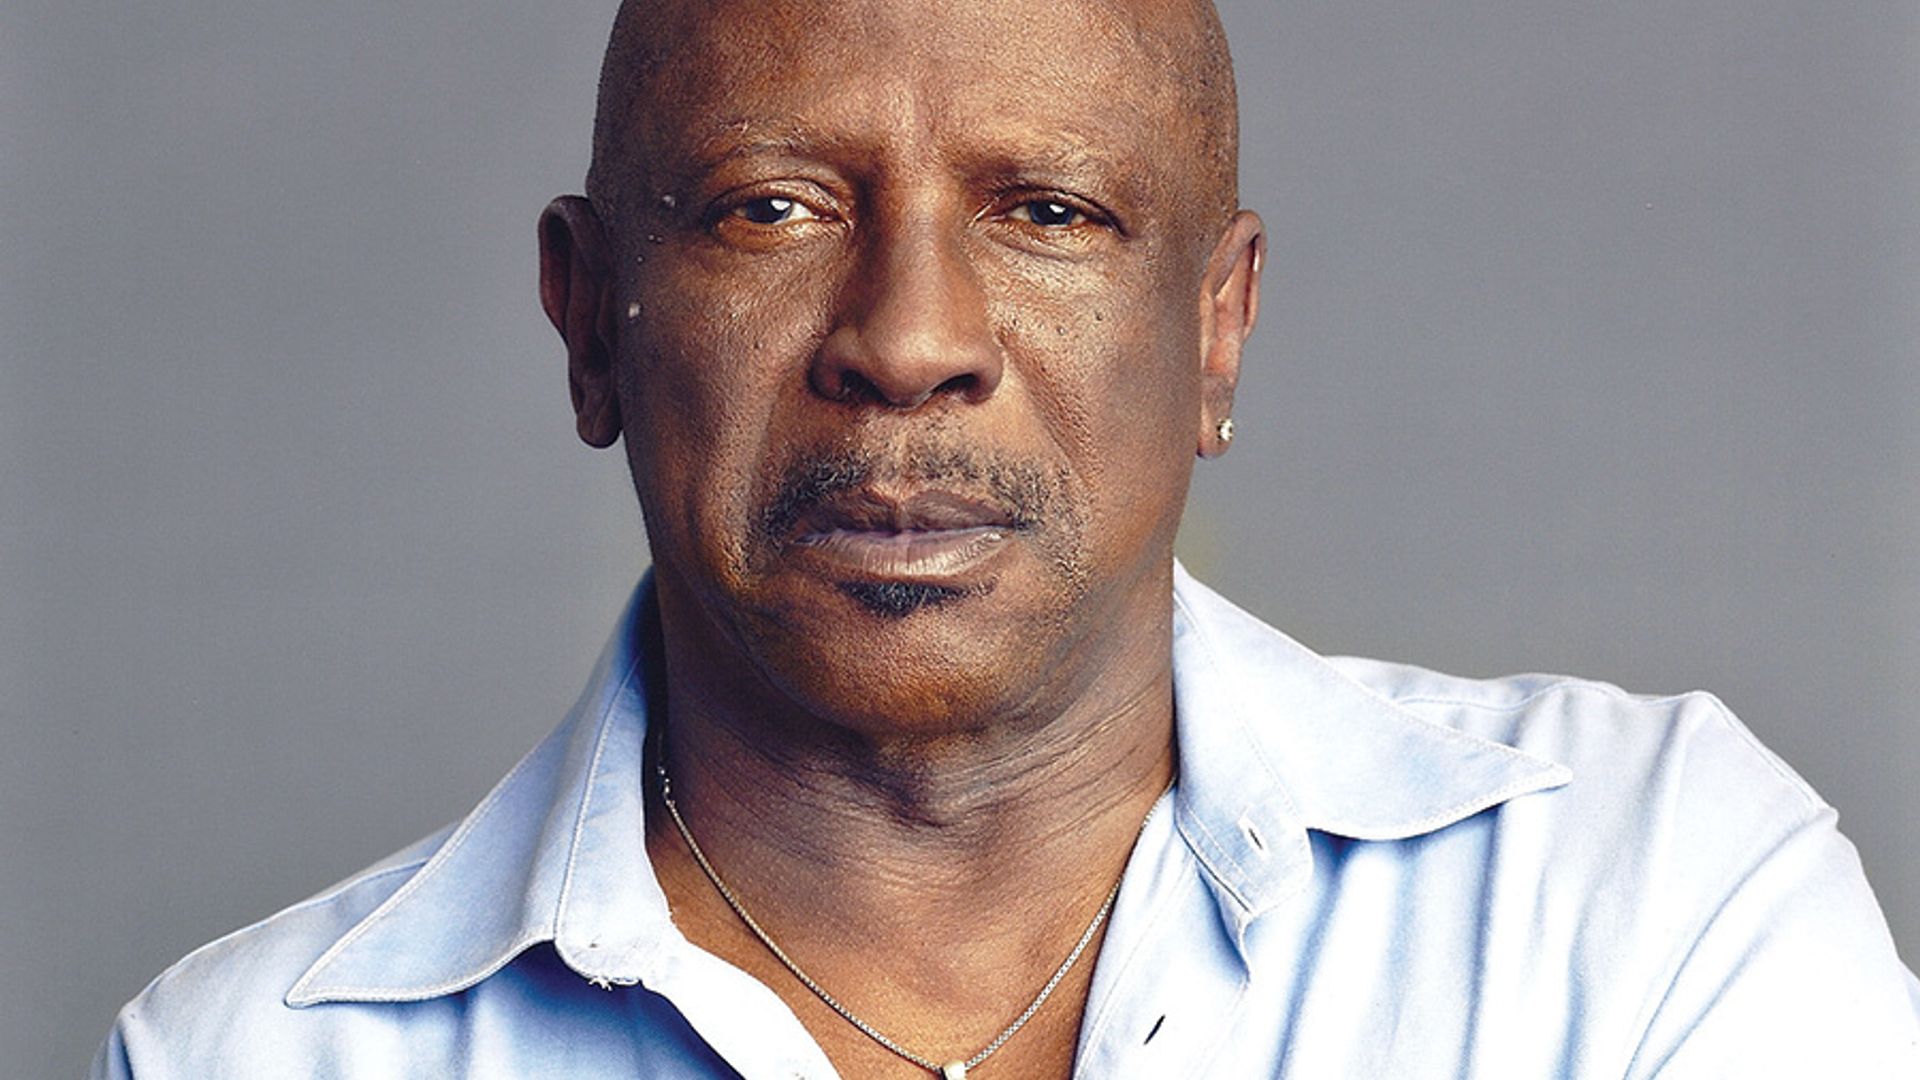 Louis Gossett Jr. on his new film 'The Cuban' and how the energetic star is loving his full life